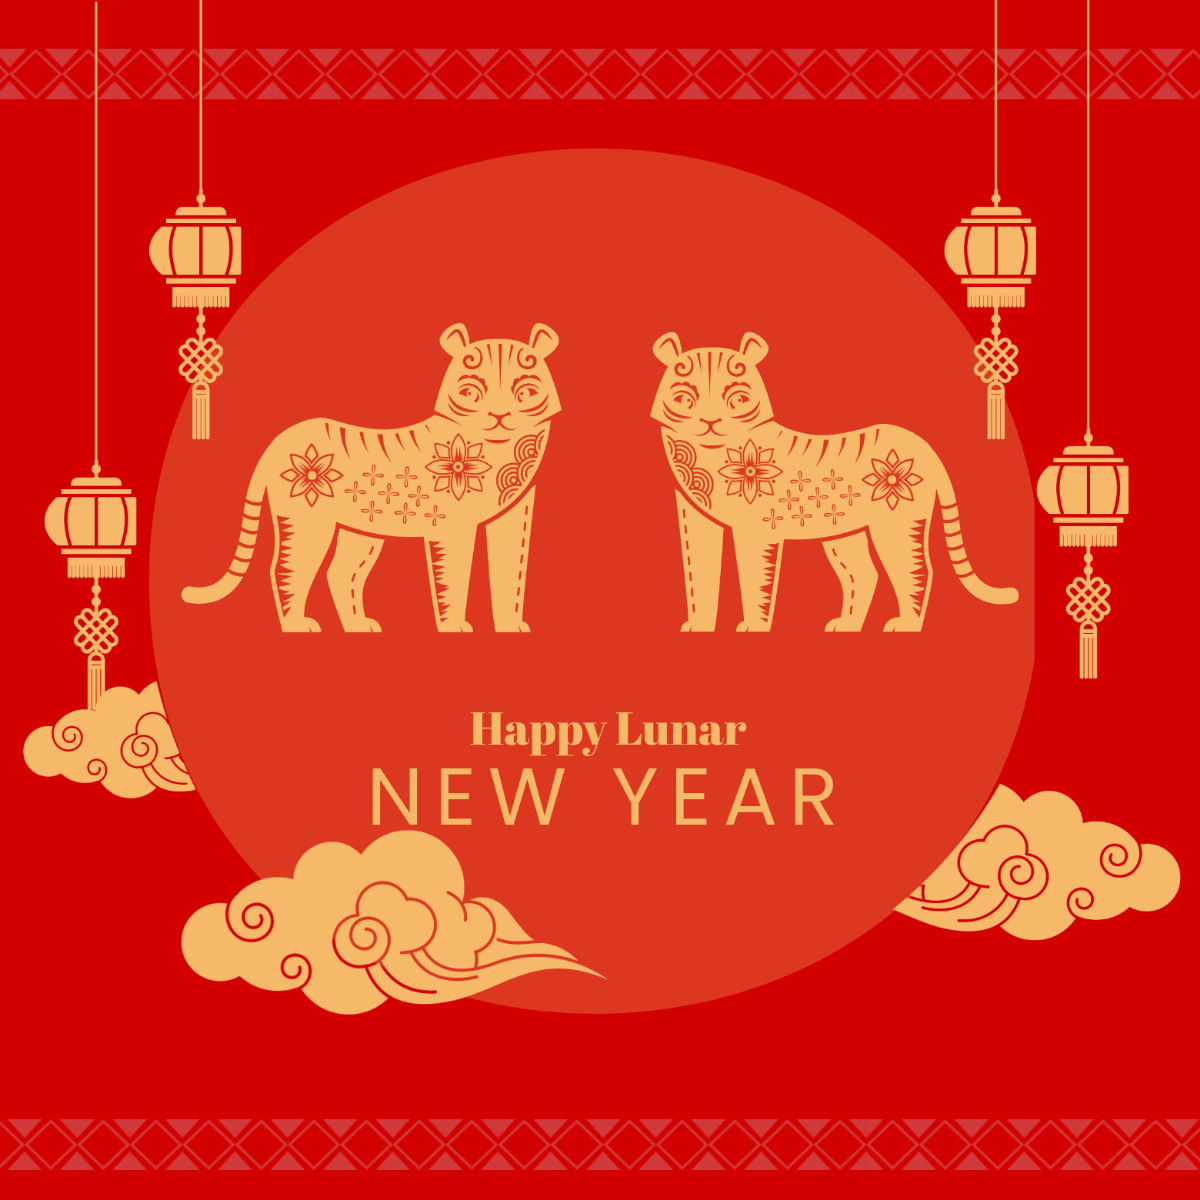 Lunar New Year Poster Vector